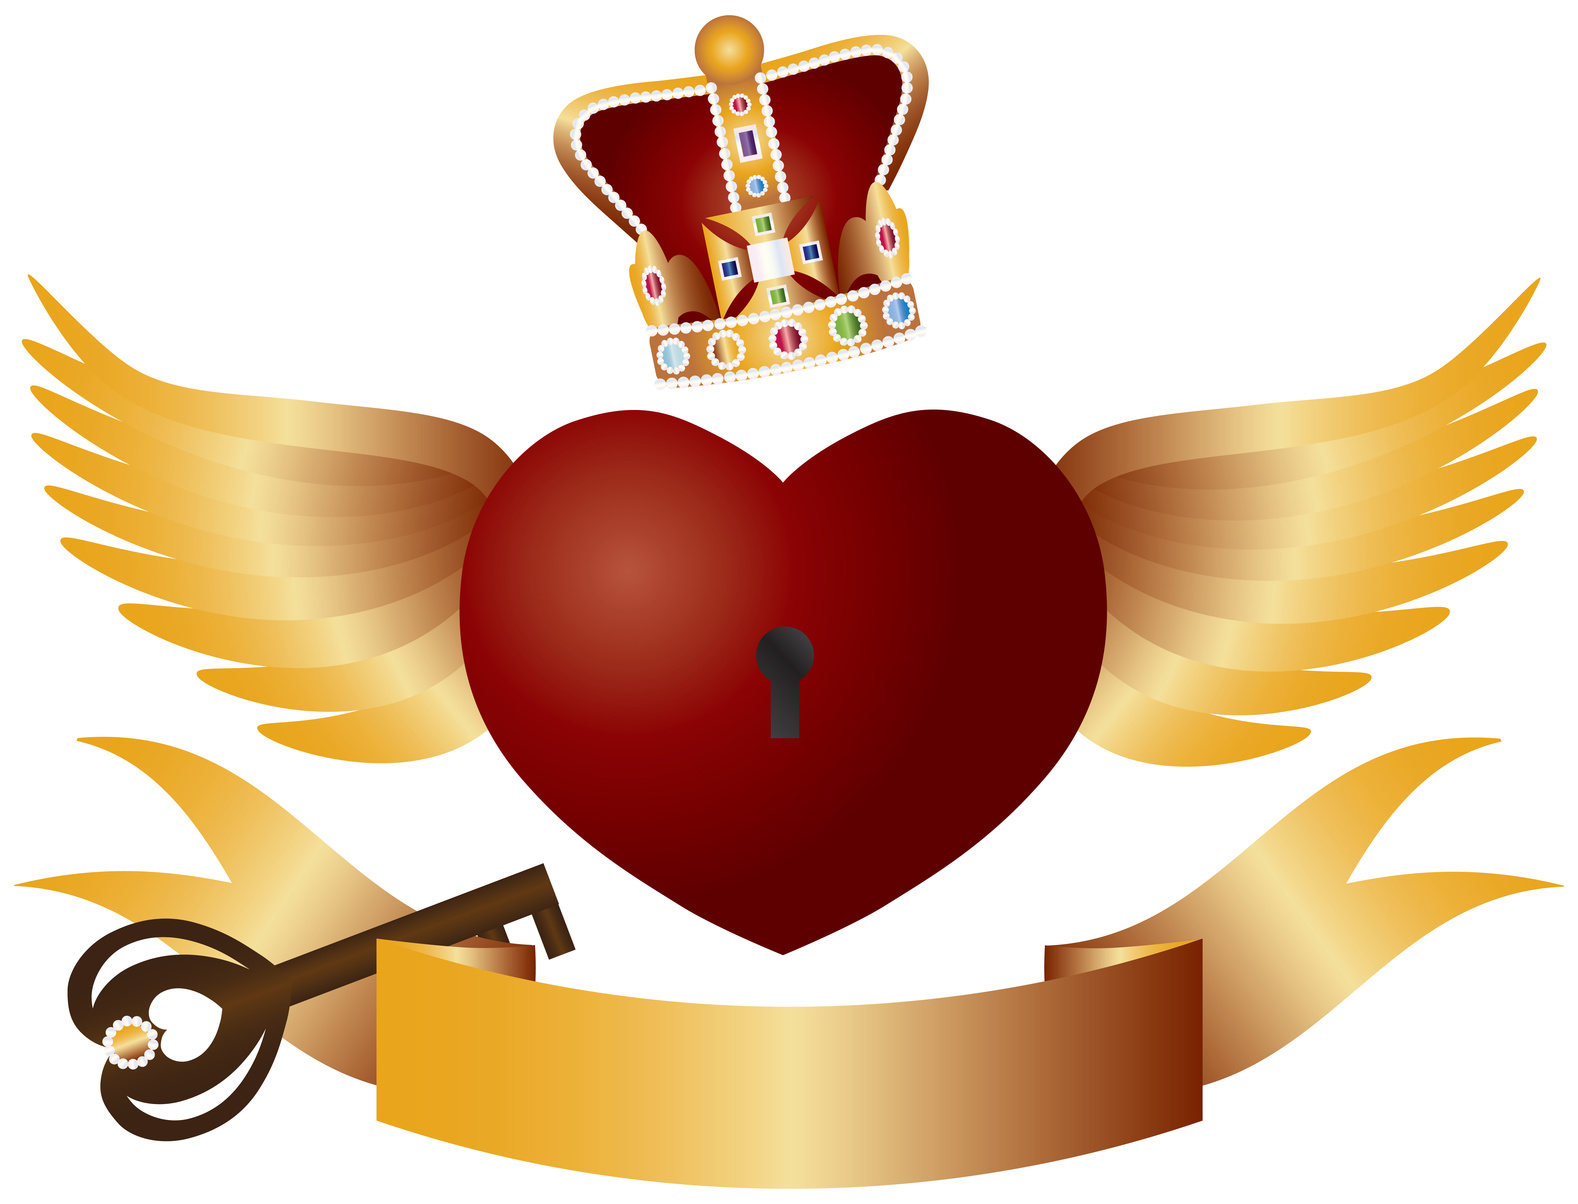 Comedic Drama Play Script: 'Prince Of Hearts' by Ros Adler